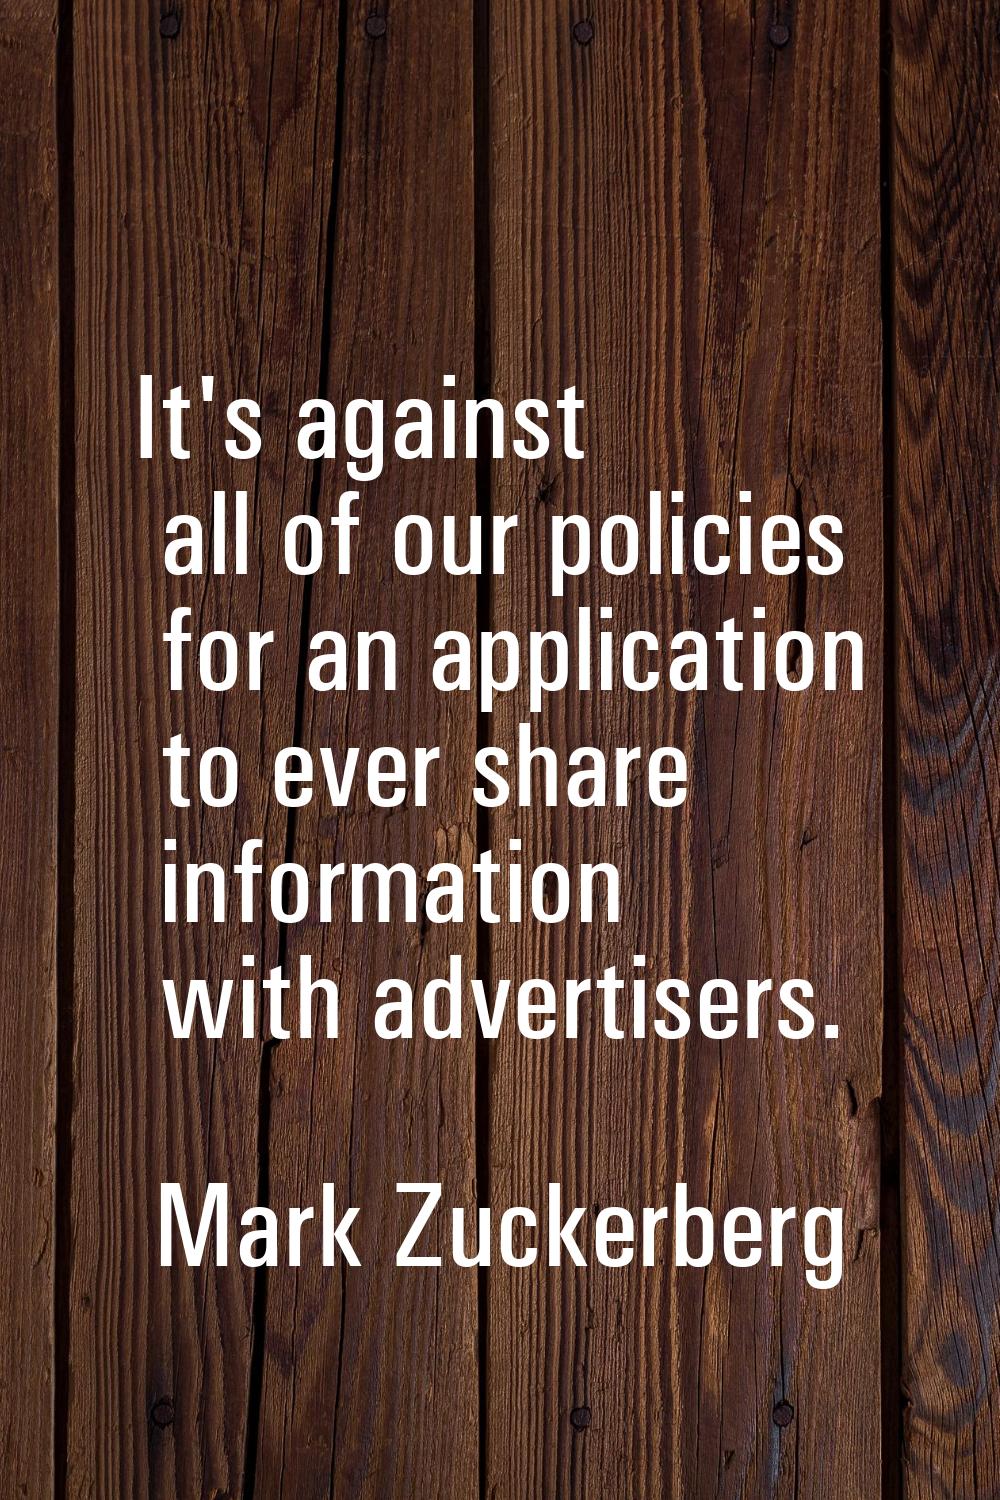 It's against all of our policies for an application to ever share information with advertisers.